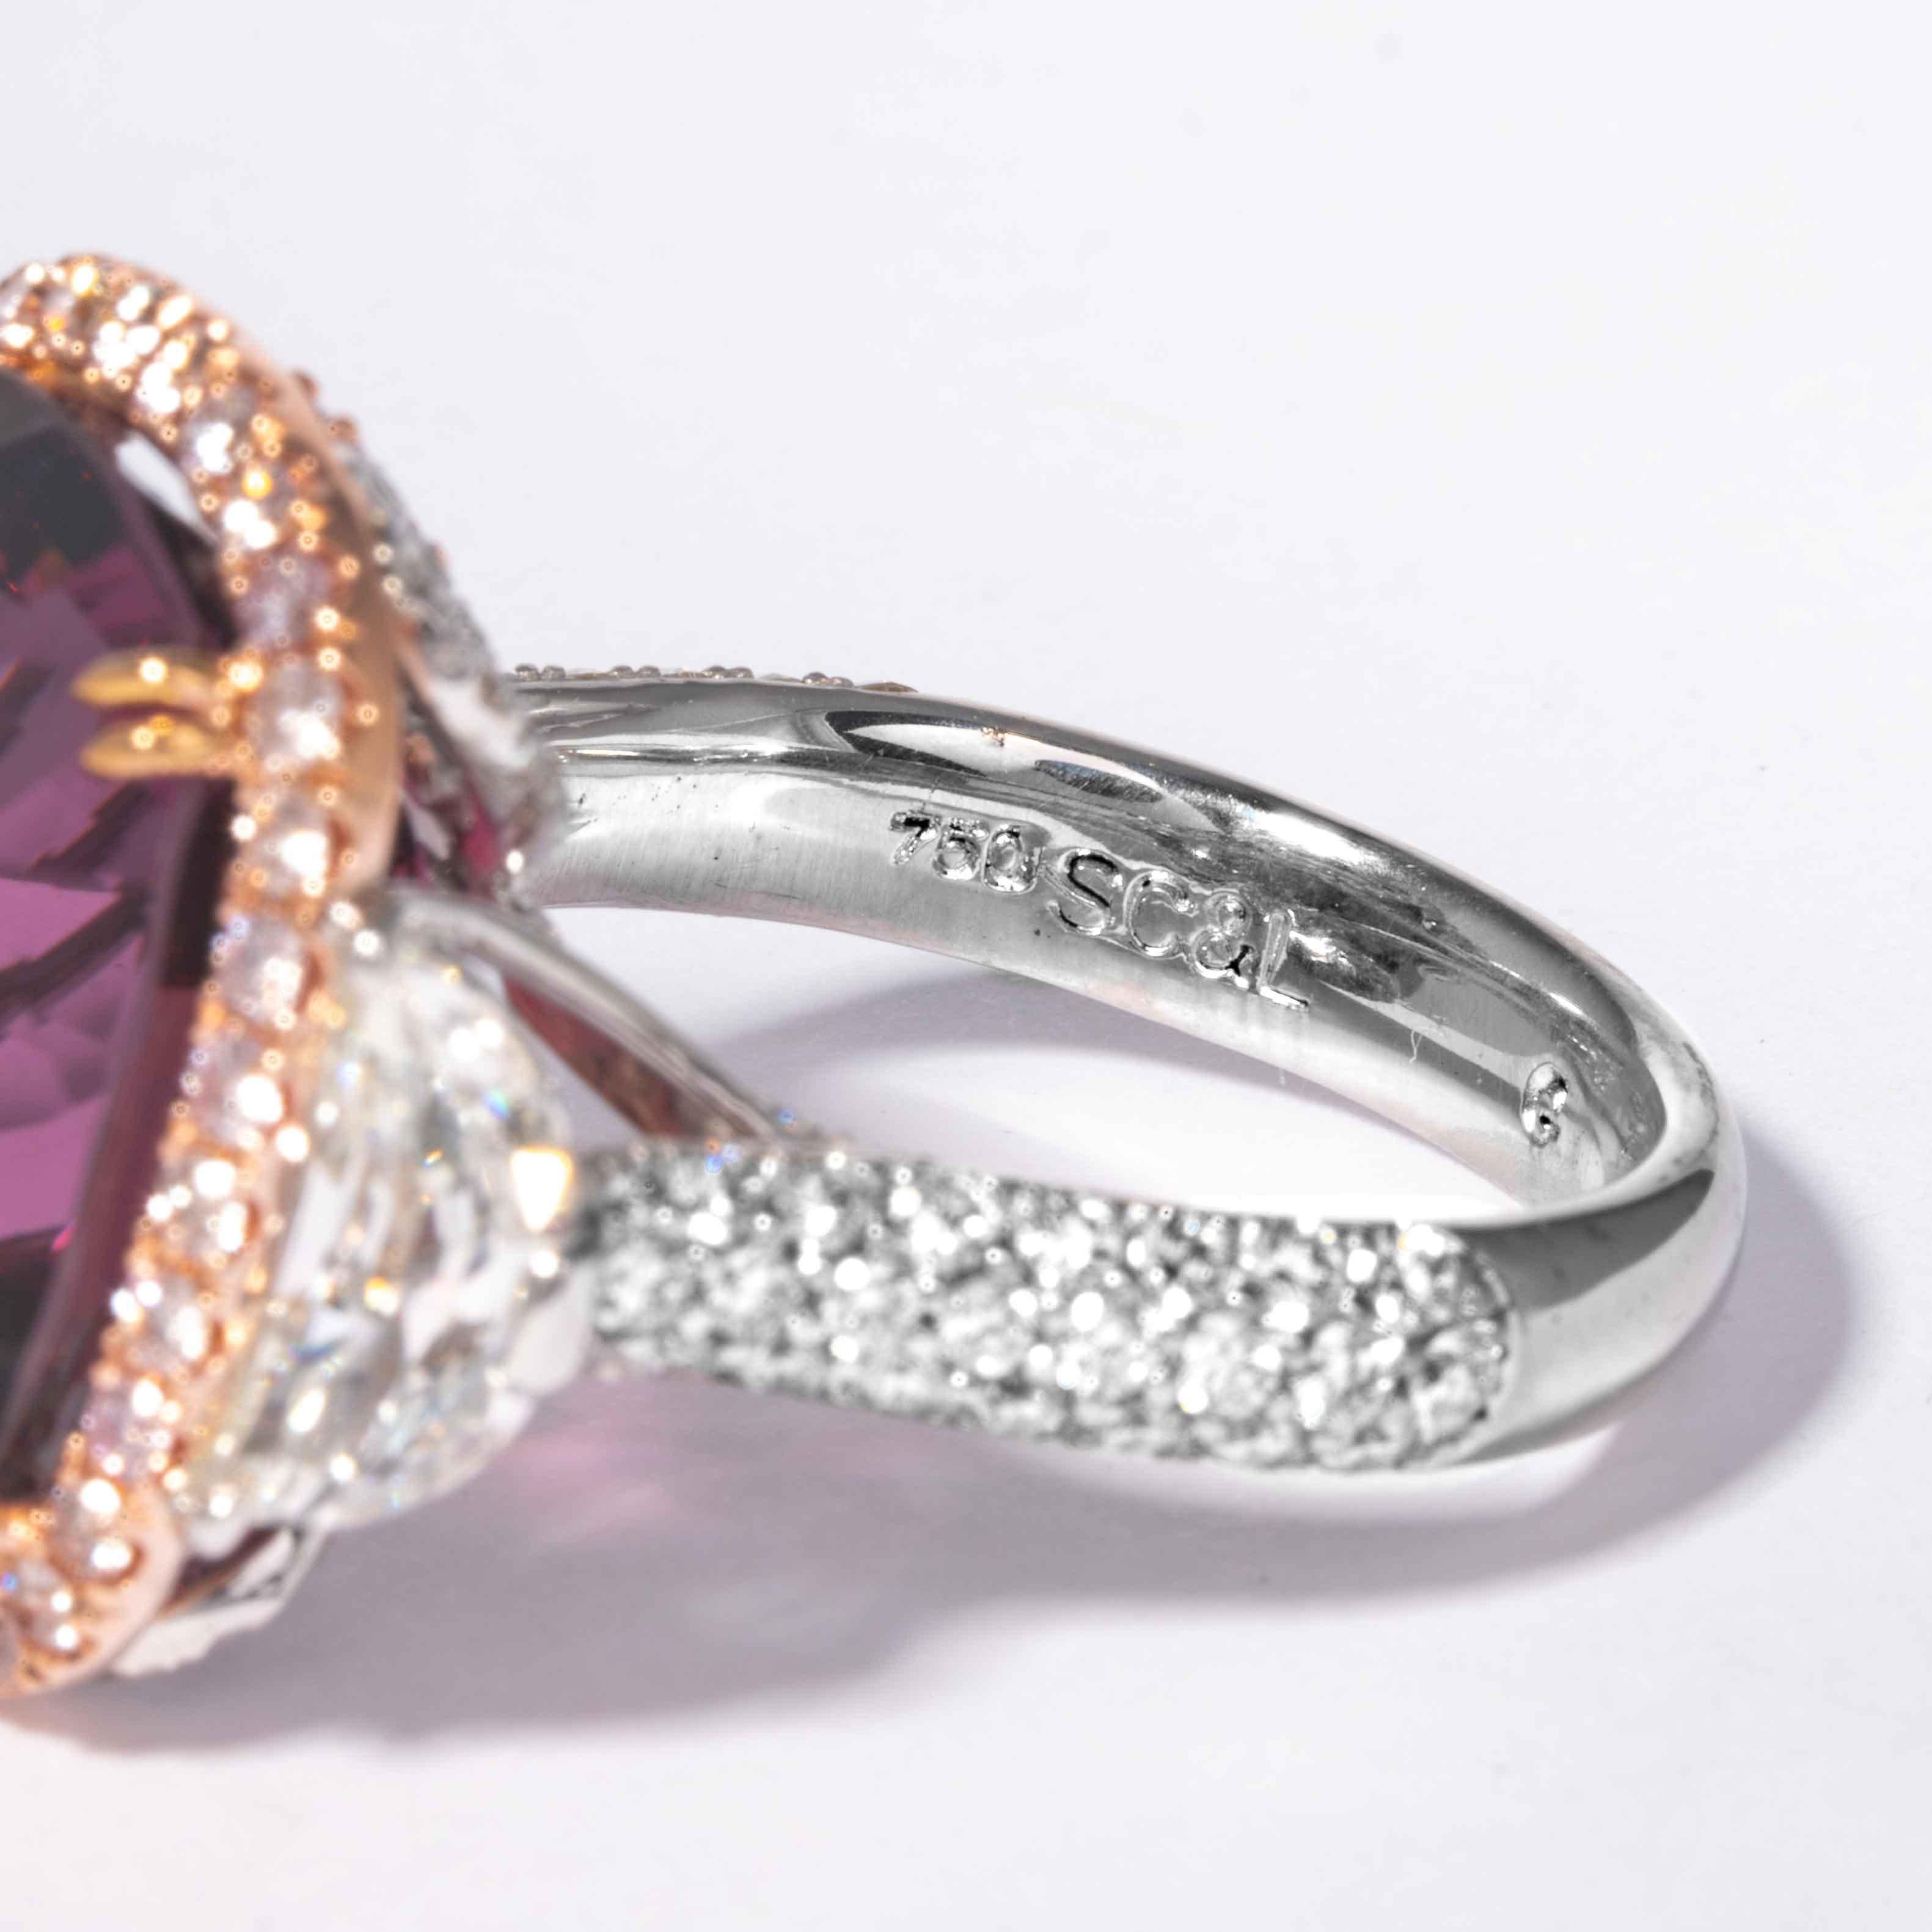 Shreve, Crump & Low 15.38 Carat Burmese Pink Spinel and Diamond Ring 'Dungaire' 1